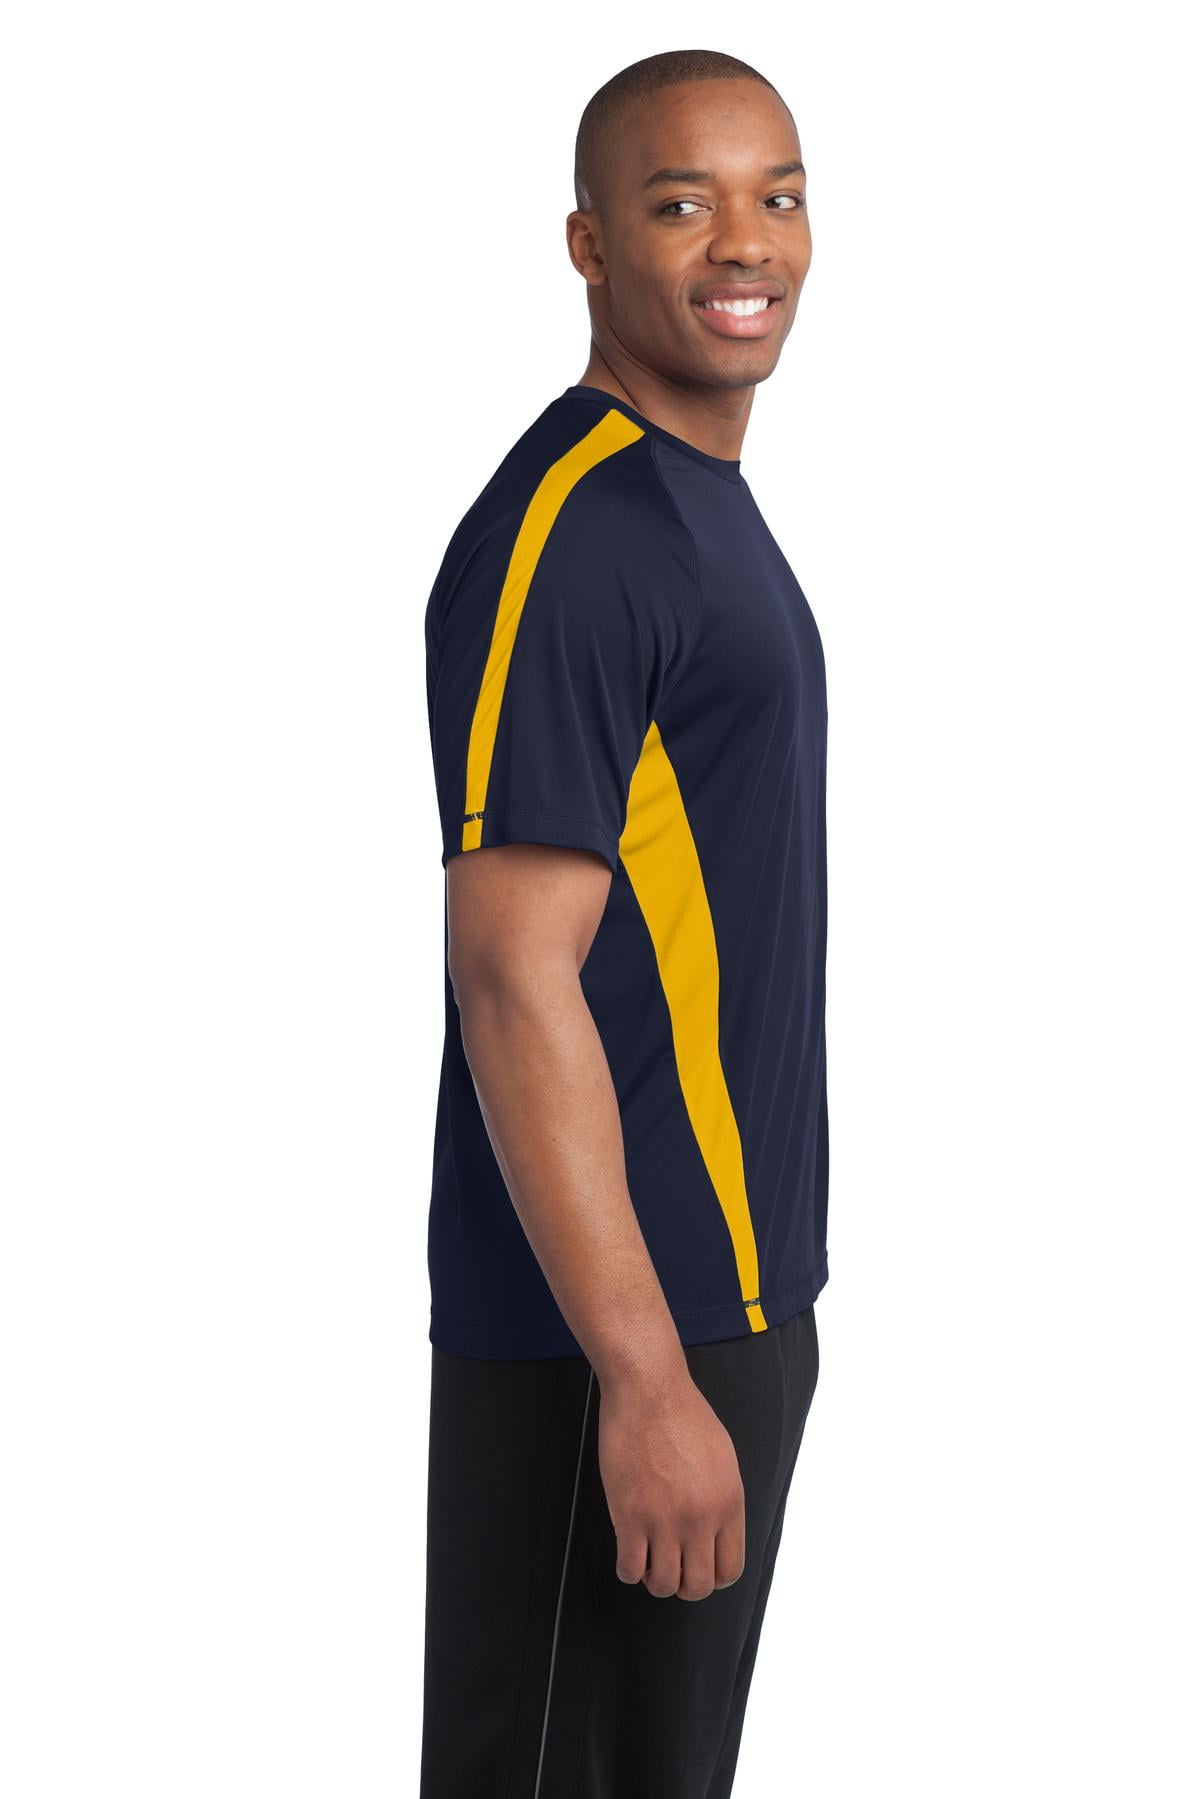  SPORT-TEK Men's Colorblock PosiCharge Competitor Tee XS True  Navy/White : Clothing, Shoes & Jewelry